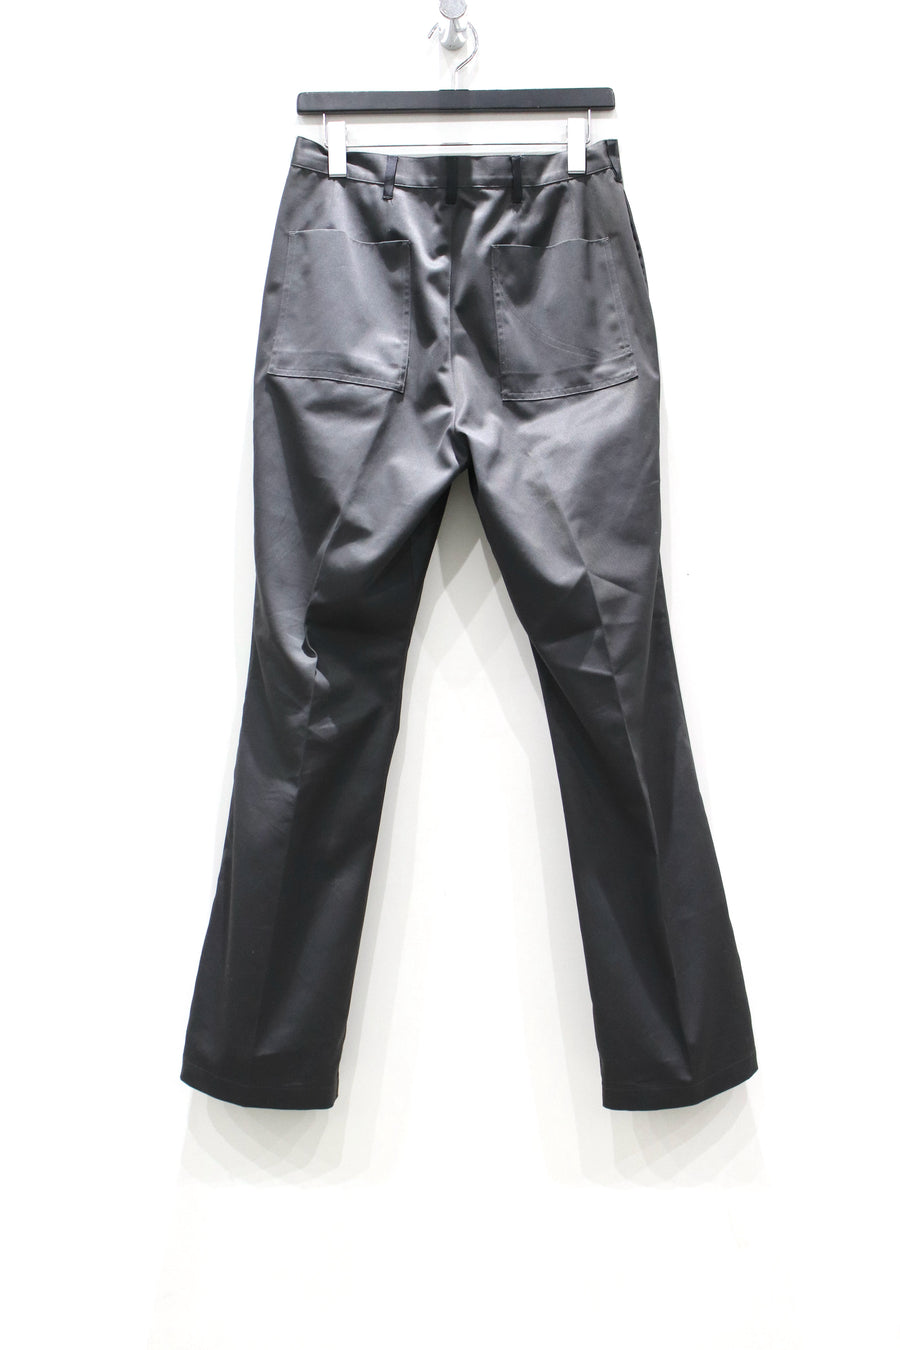 NULABEL  WORK DRESS TROUSERS-2(STAINLESS)